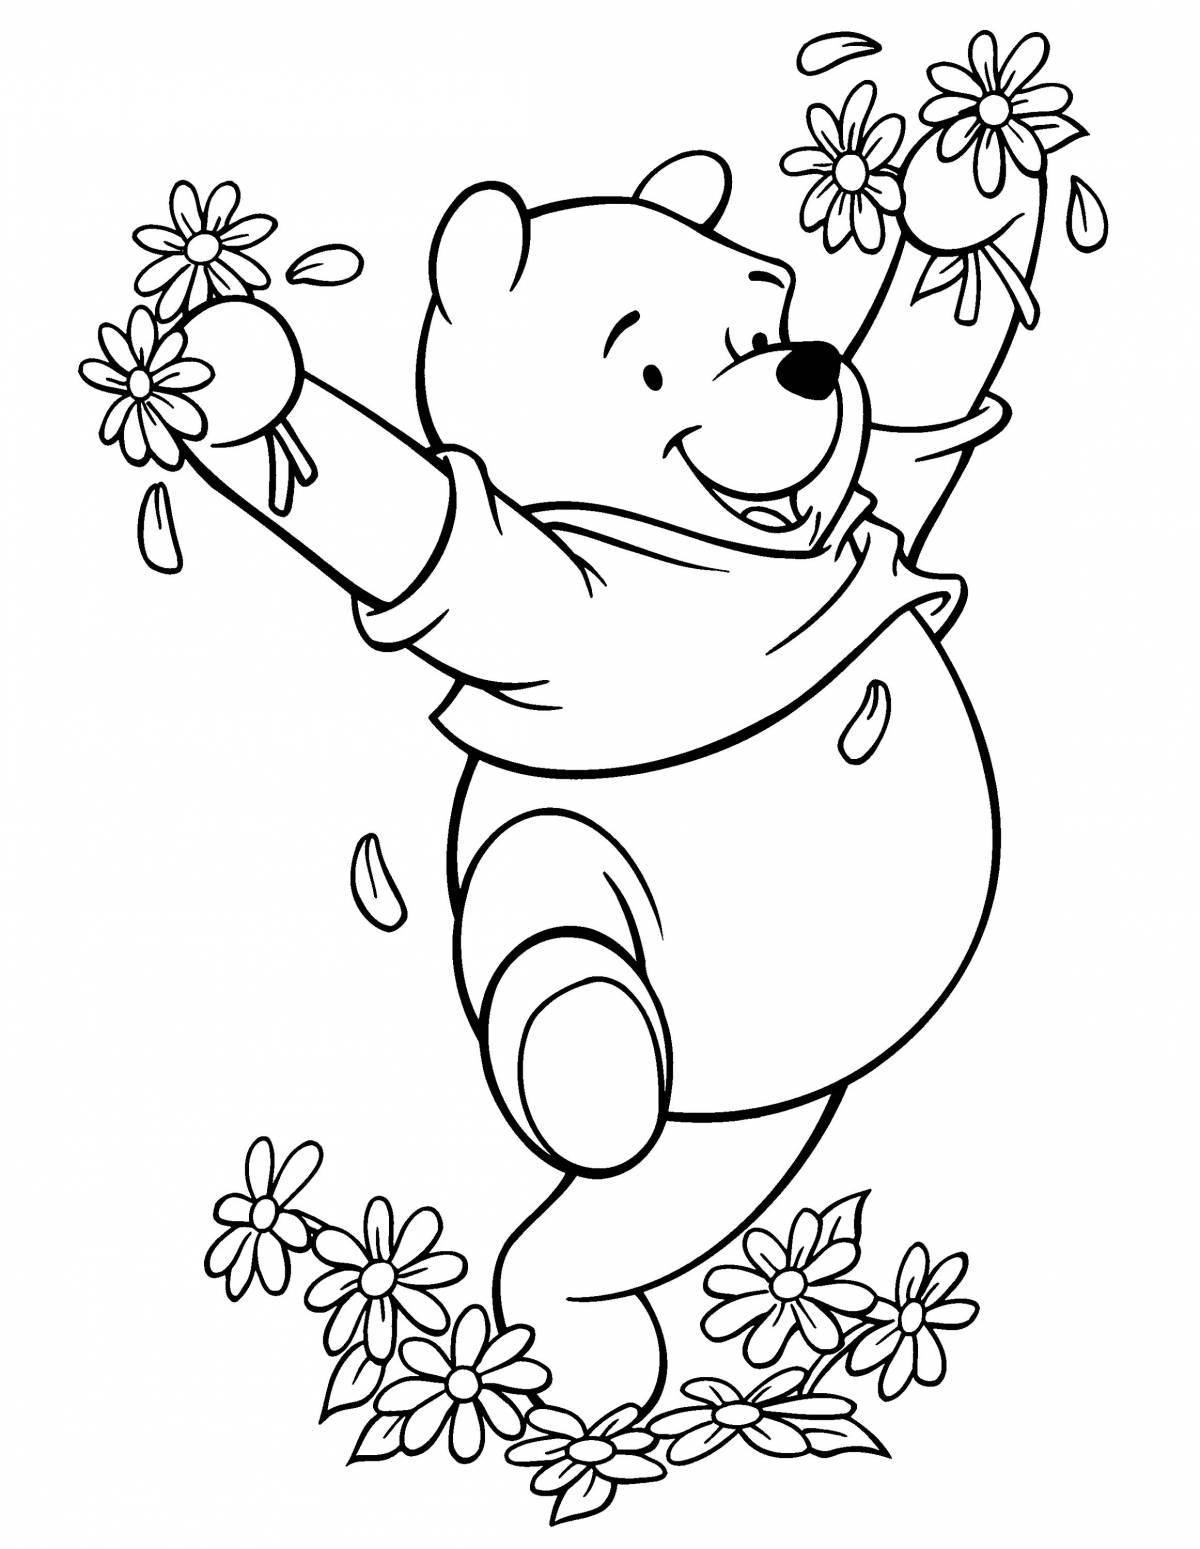 Playful winnie the pooh coloring book for kids